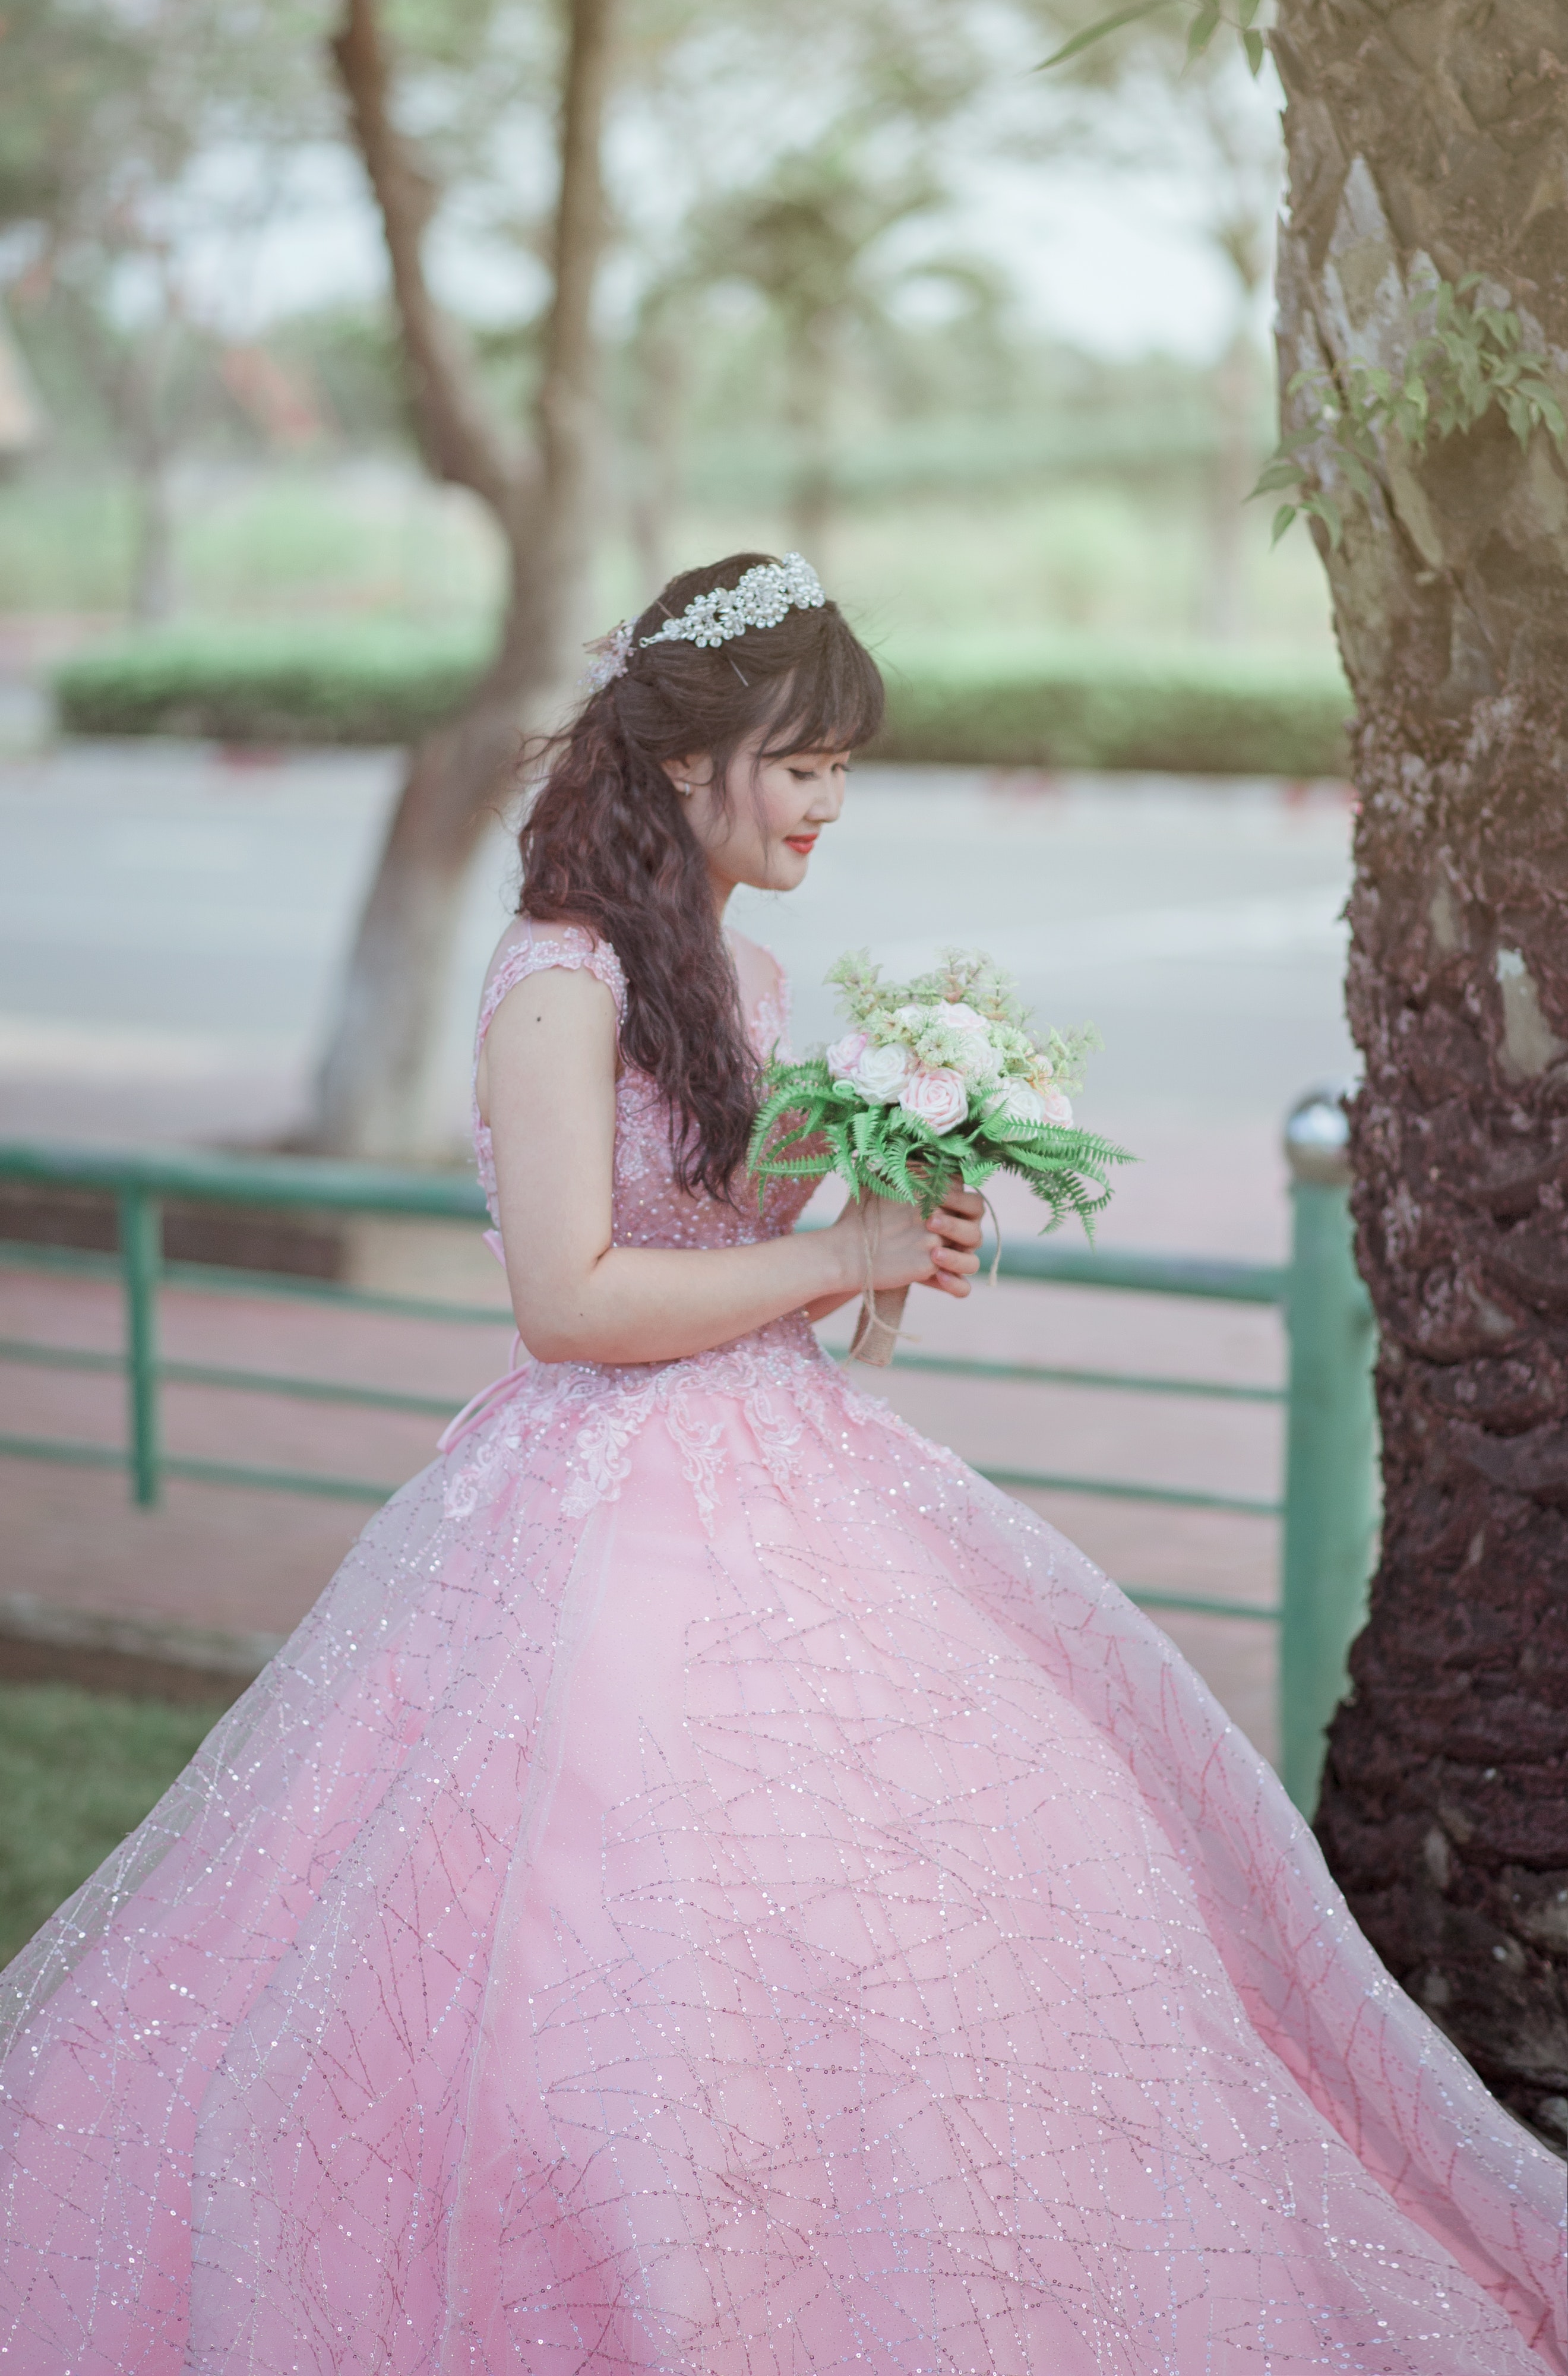 Woman in Pink Sleeveless Gown, Adult, Happy, Wedding dress, Wedding, HQ Photo